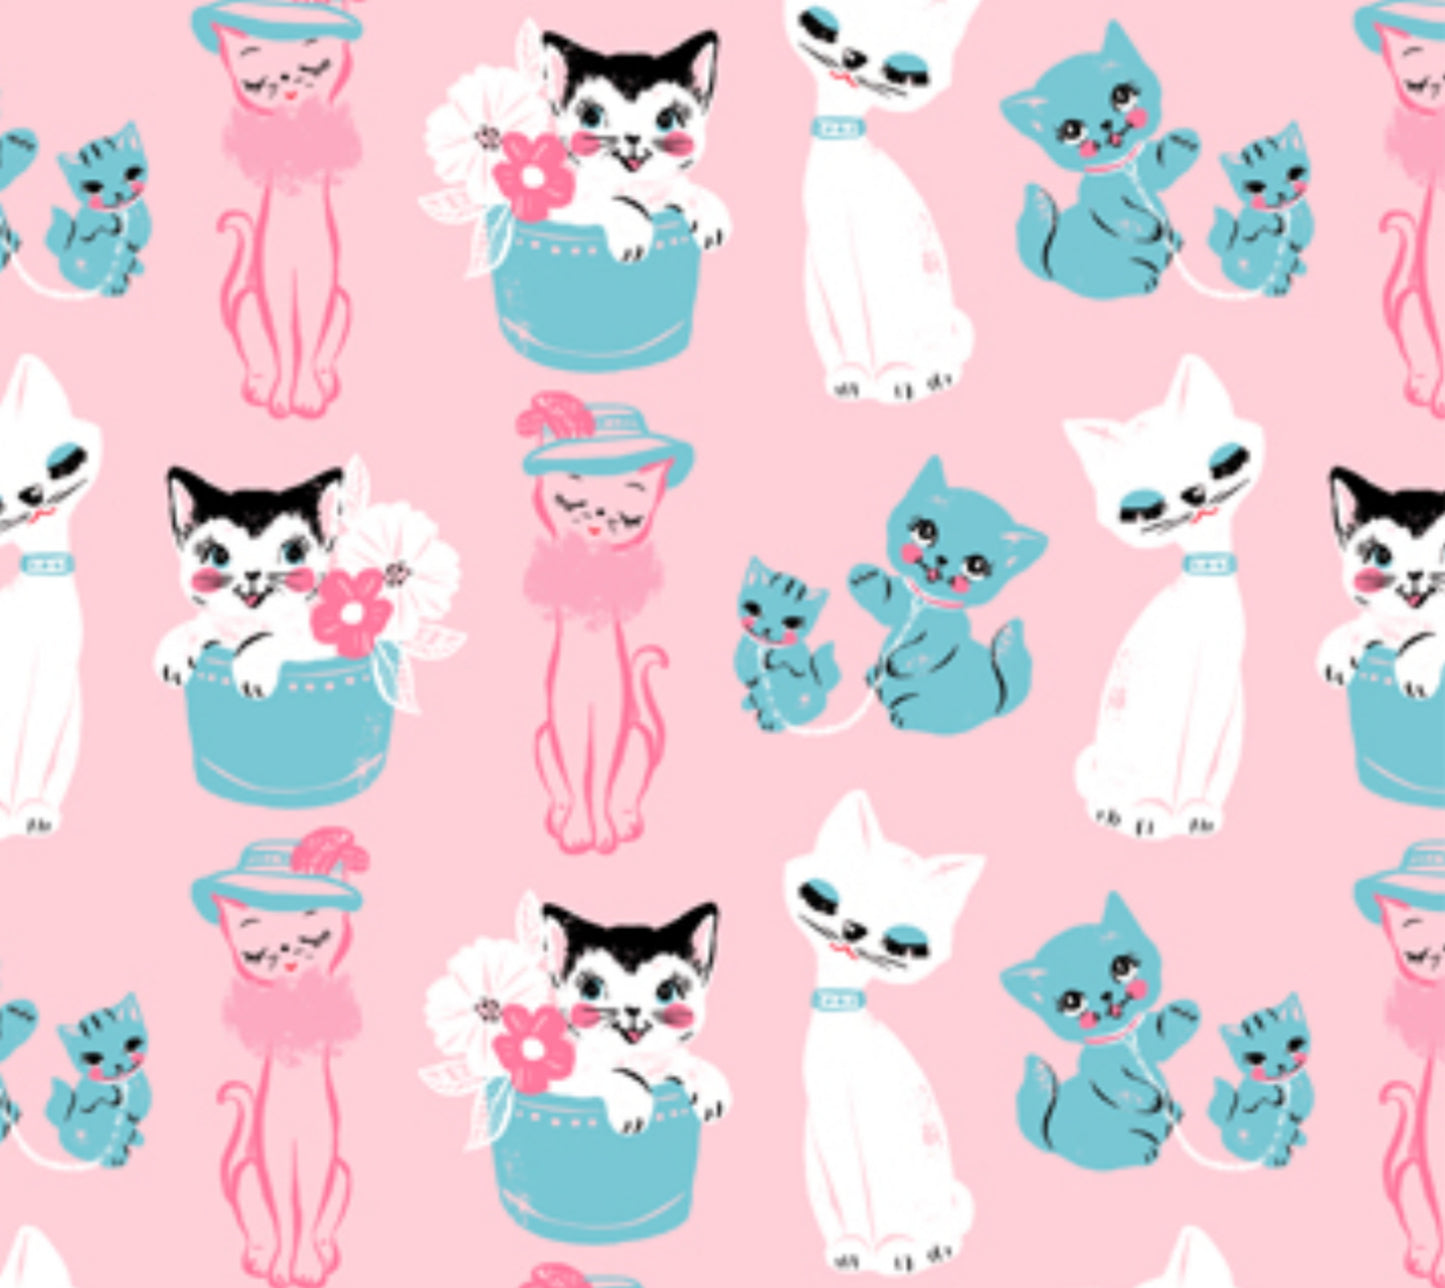 Vintage Cats - Fabric in light pink, from the Thrift Shop Collection by Louise Pretzel for Figo Fabrics.